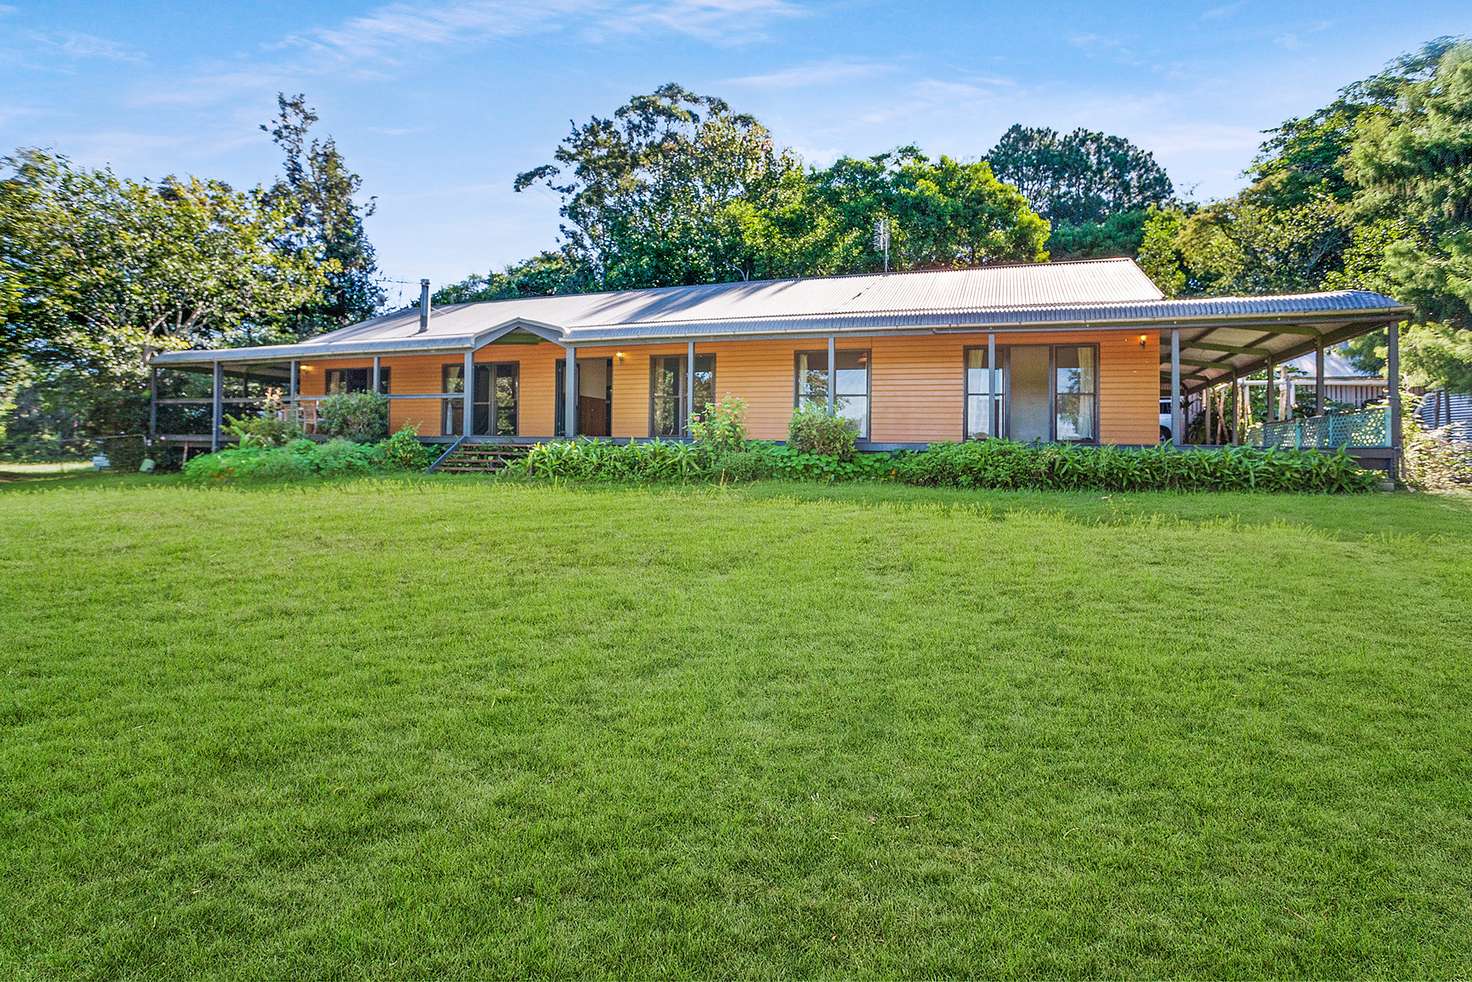 Main view of Homely house listing, 146 Teutoberg Ave, Witta QLD 4552